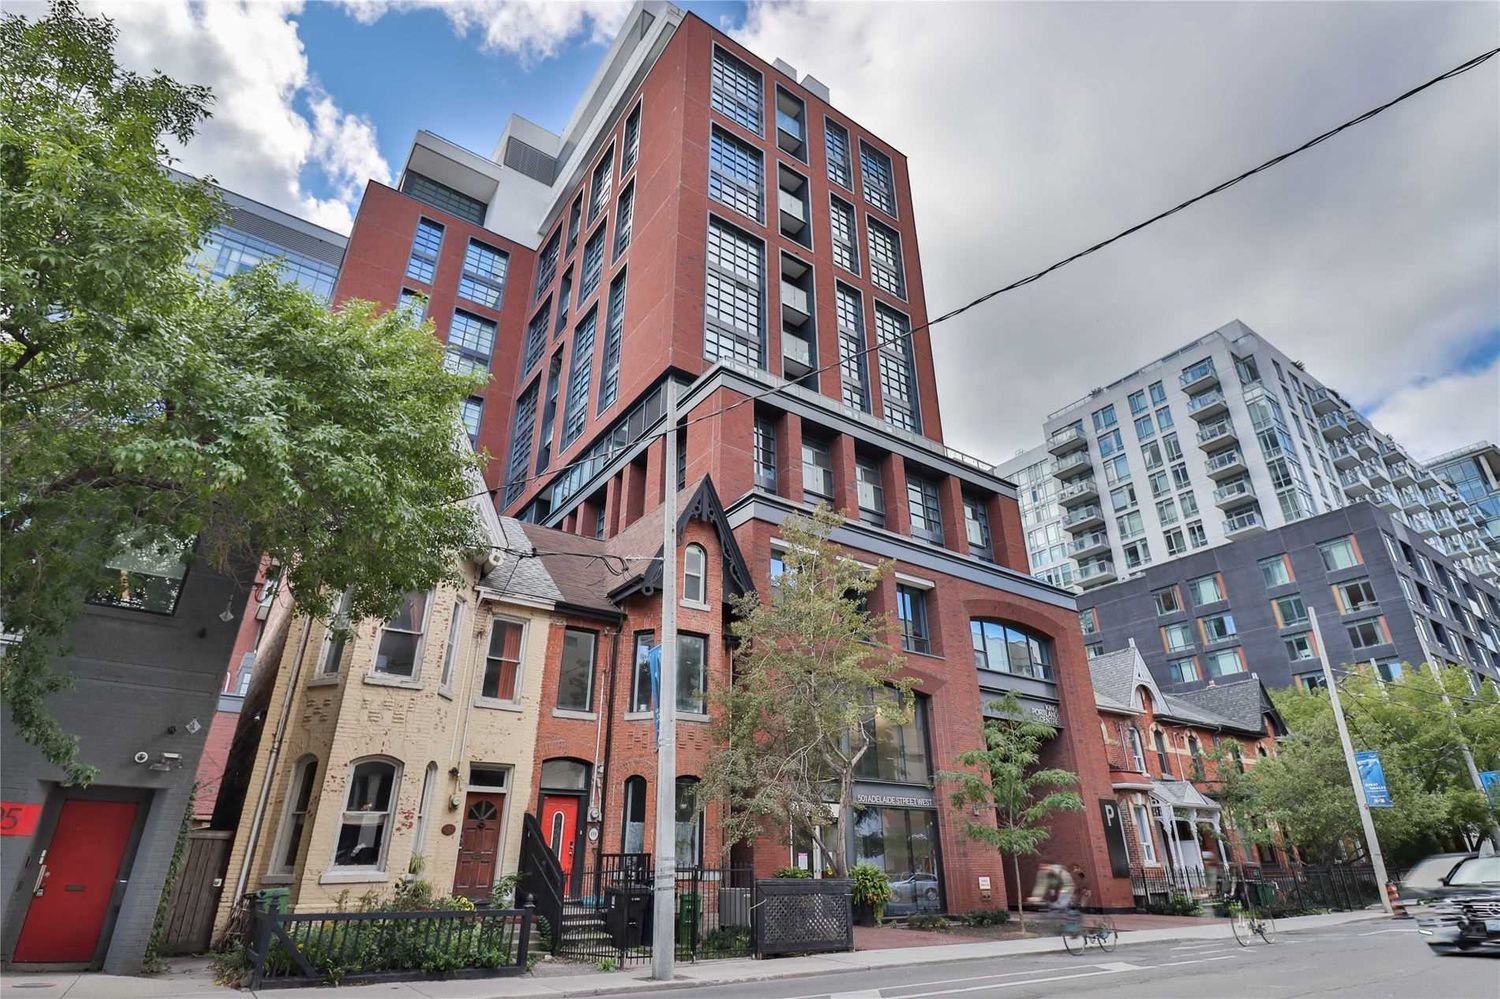 620 King Street W. Kingly Condos is located in  Downtown, Toronto - image #1 of 2